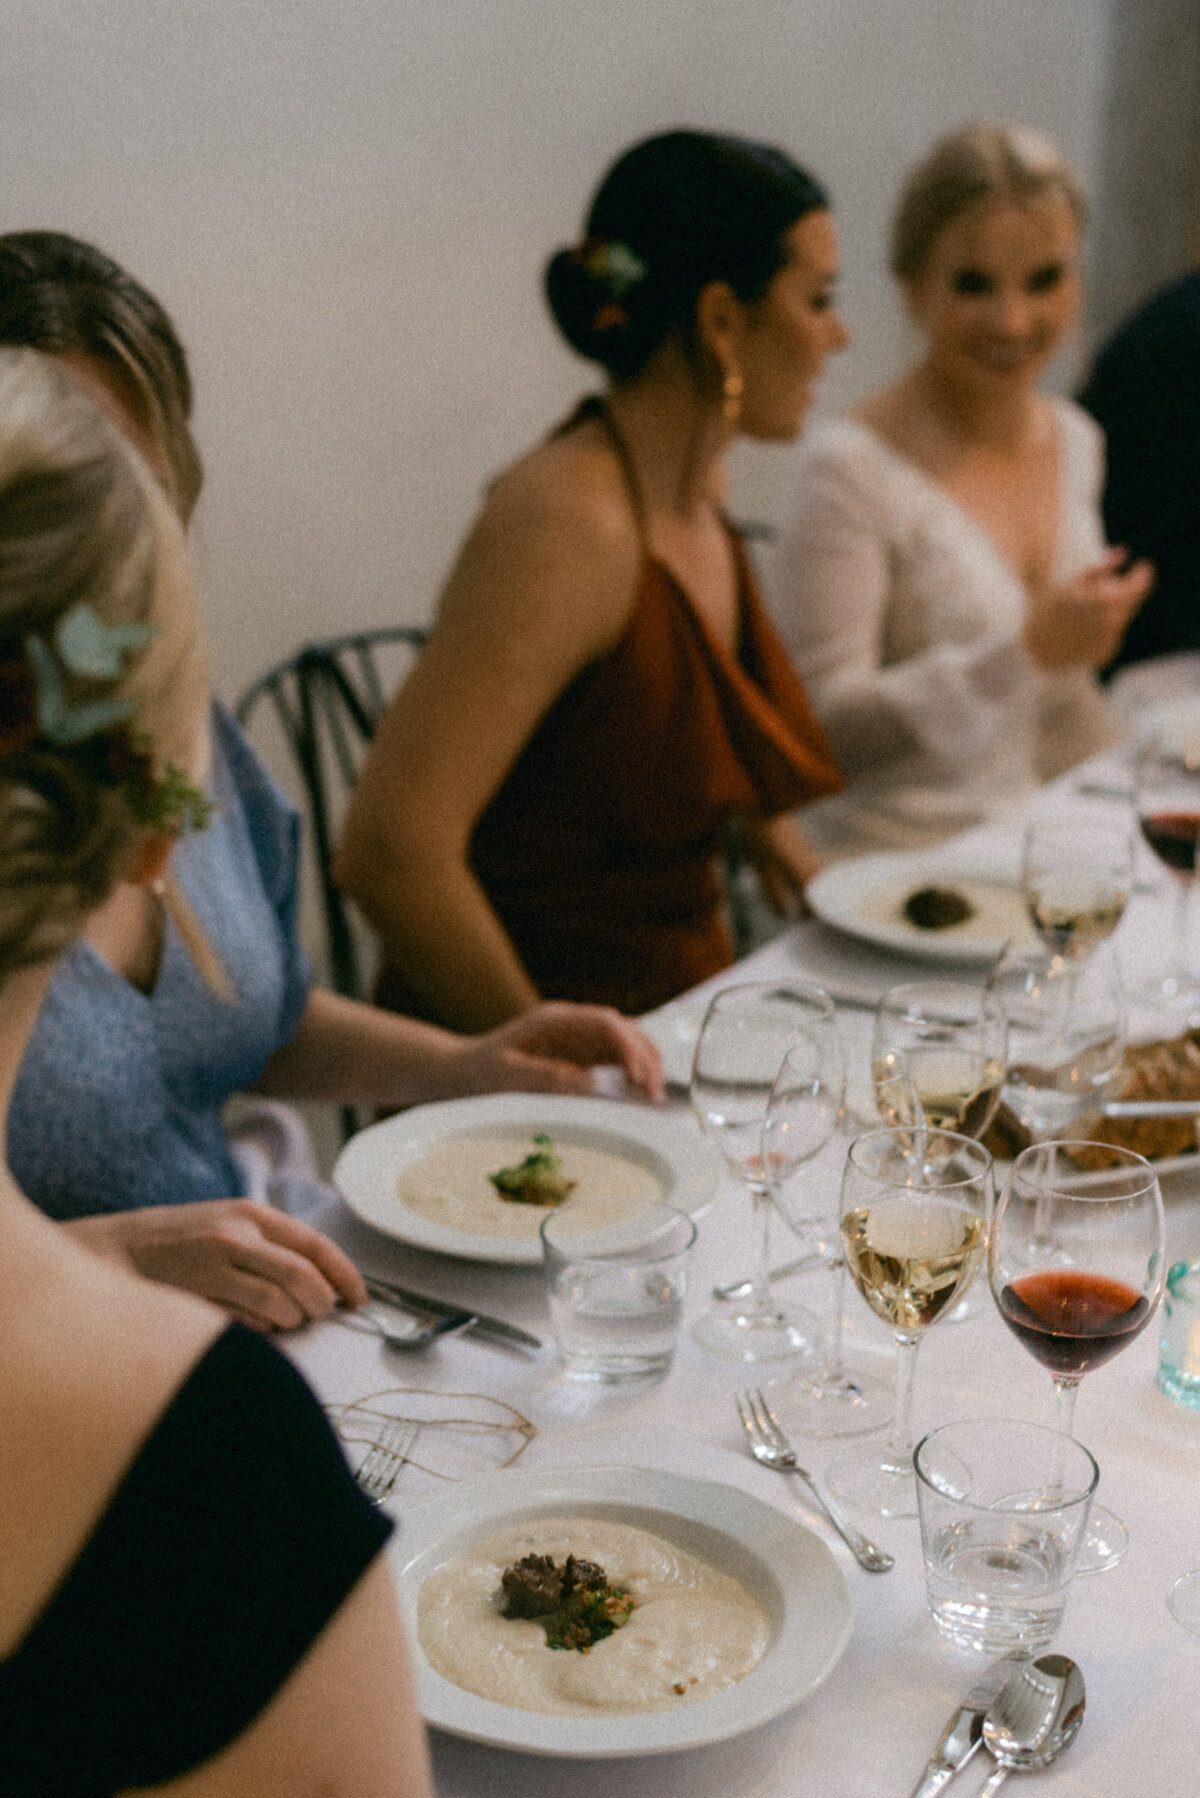 A documentary wedding  photo of the dinner in Oitbacka gård captured by wedding photographer Hannika Gabrielsson in Finland